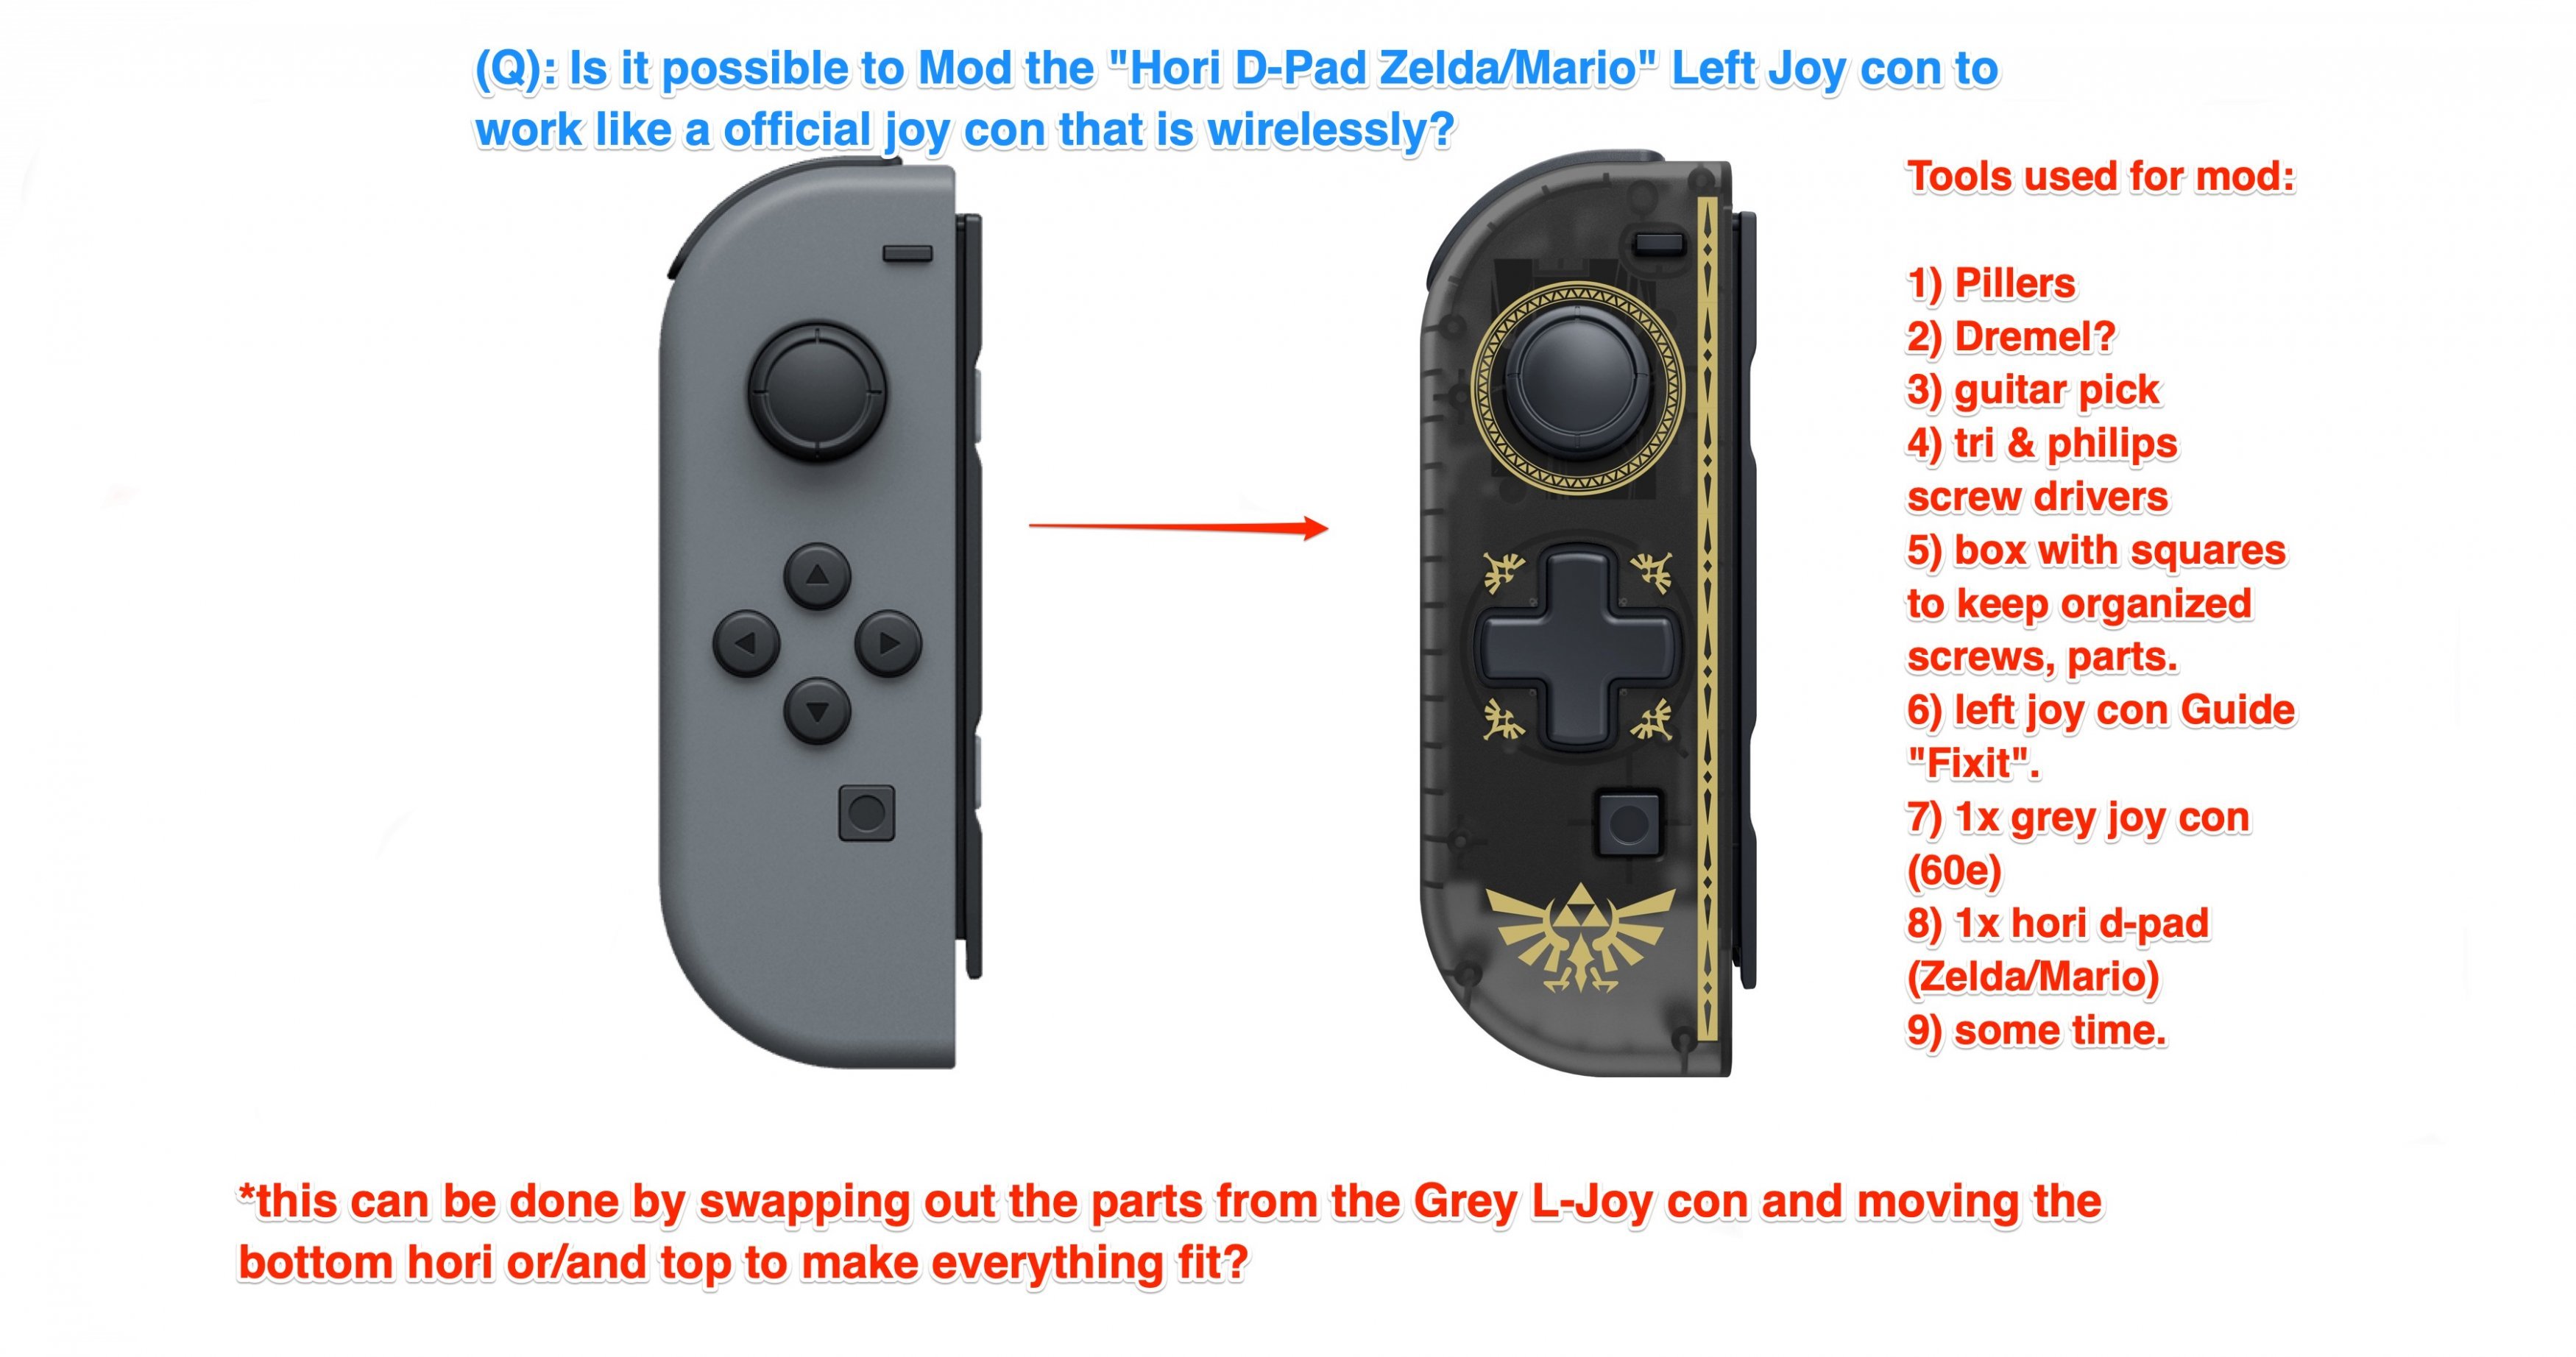 Q): Is it possible to mod the Hori D-Pad Zelda/Mario joy con to be  wireless? | GBAtemp.net - The Independent Video Game Community